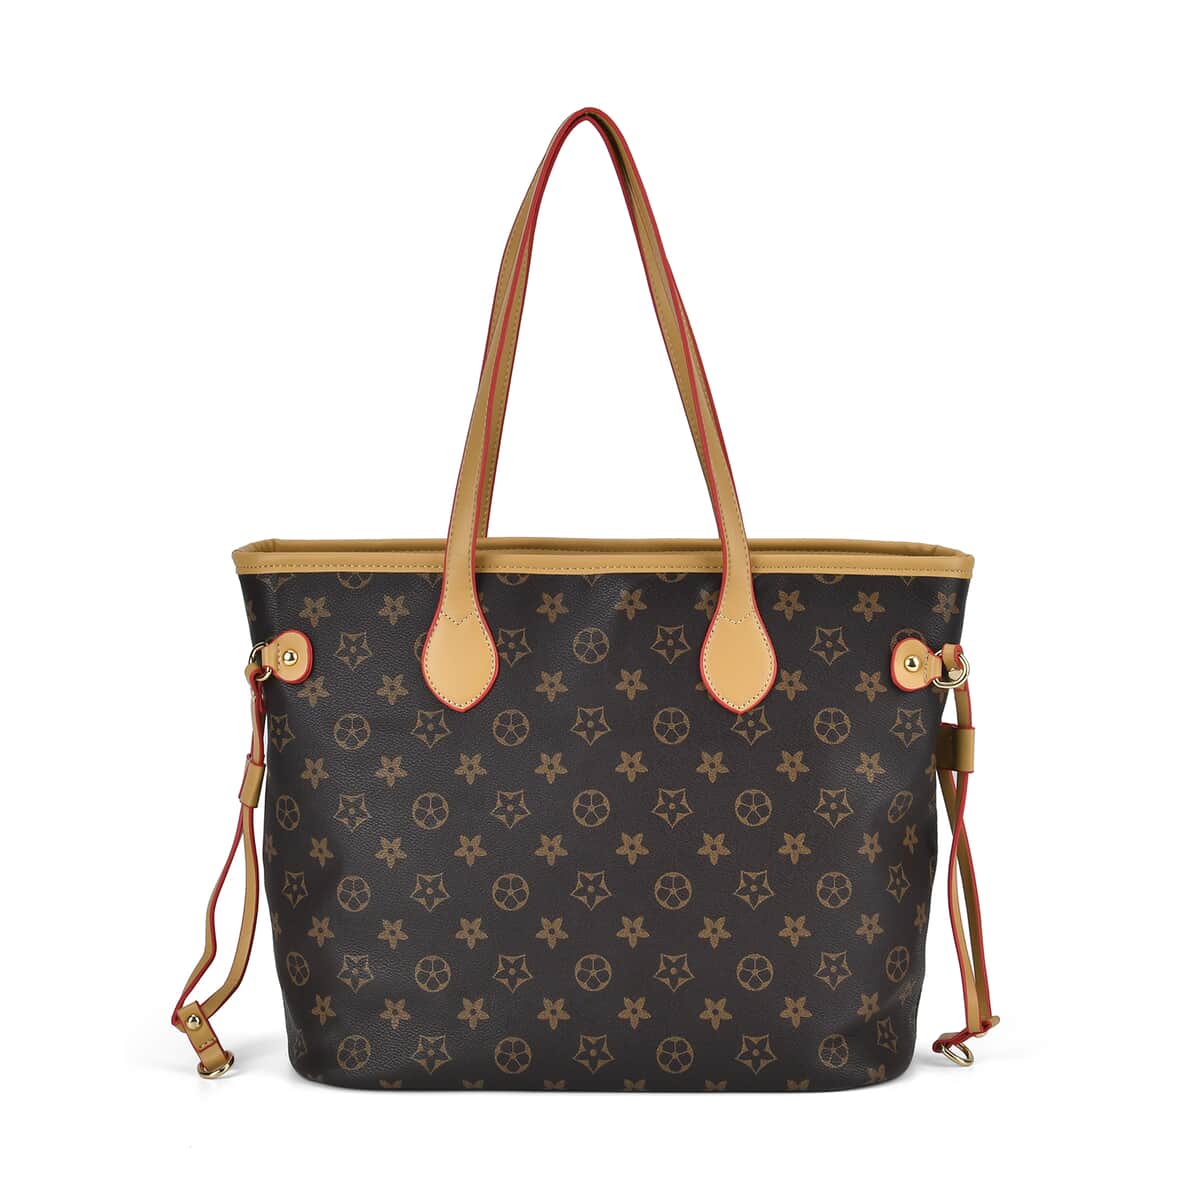 Dark Brown with Flower Print Faux Leather Tote Bag (15.7"x6.3"x11.4") with Apricot Handle image number 0